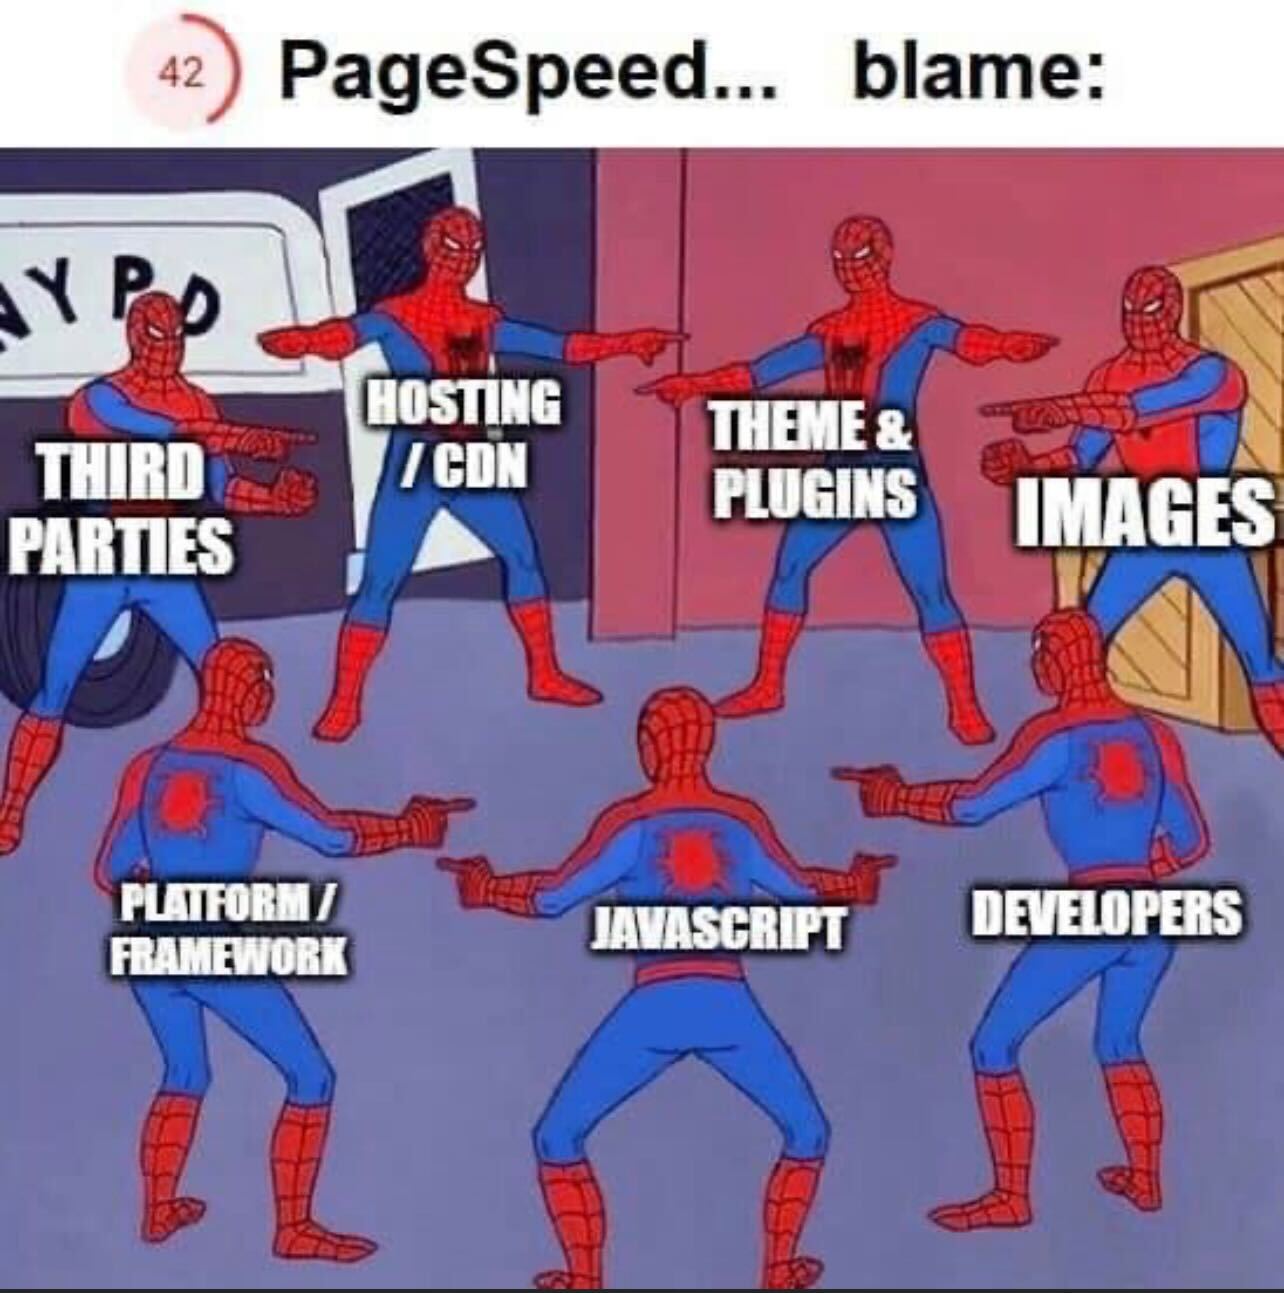 funny web development meme about Google pagespeed